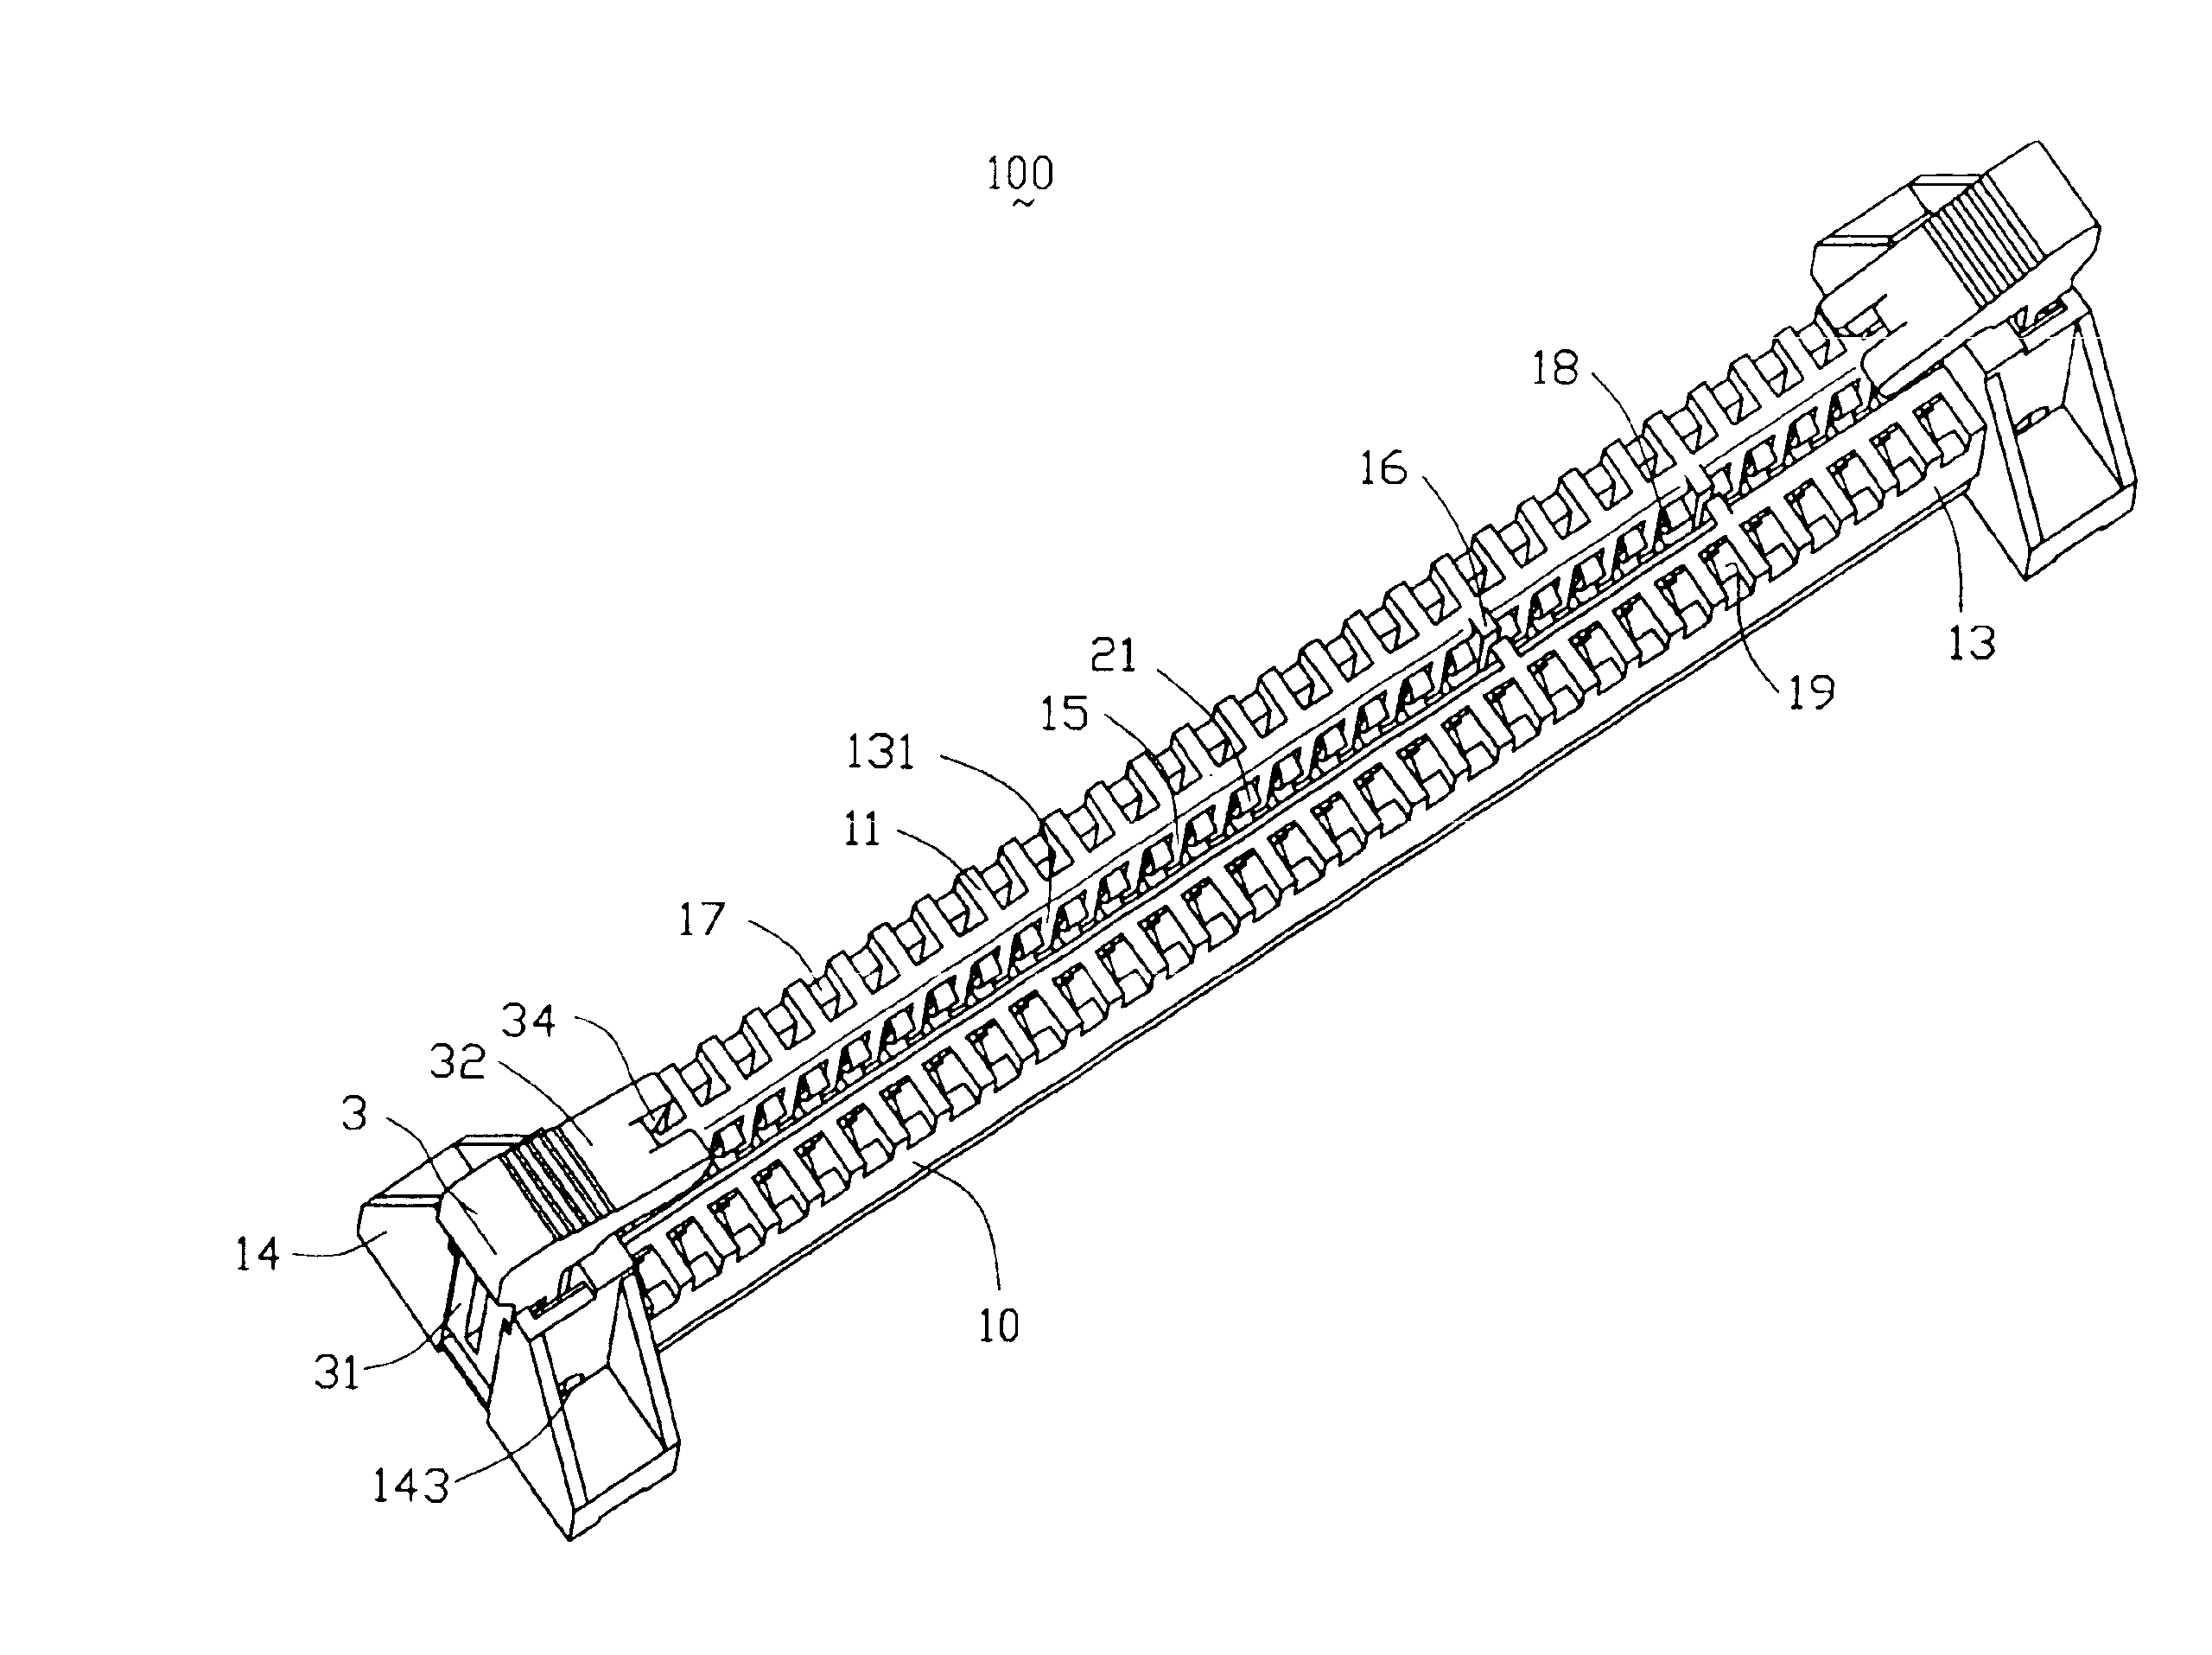 Electrical connector having heat-dissipation structure